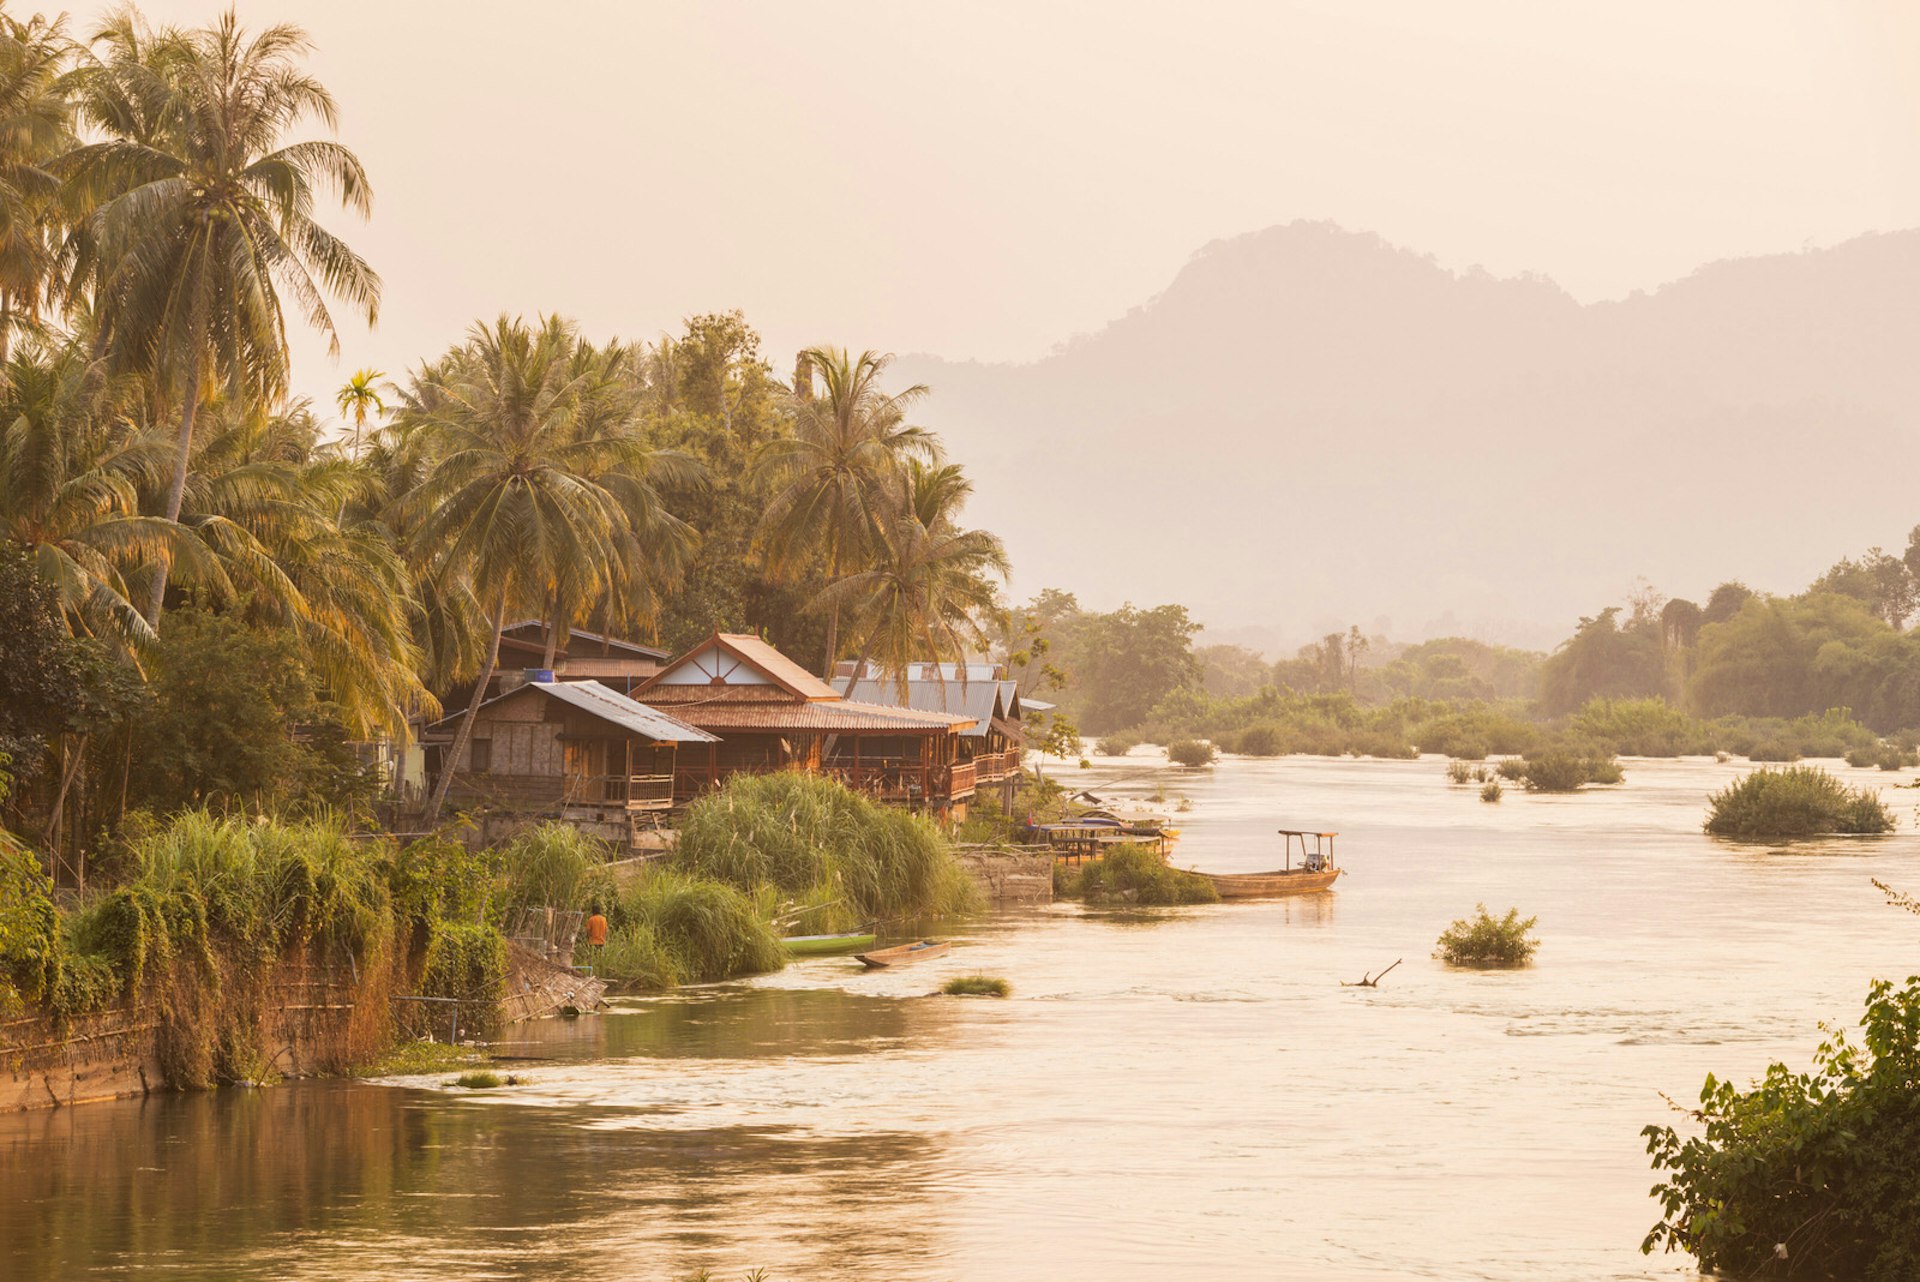 The sun sets over the Mekong beside the island of Don Khon, in the Four Thousand Islands